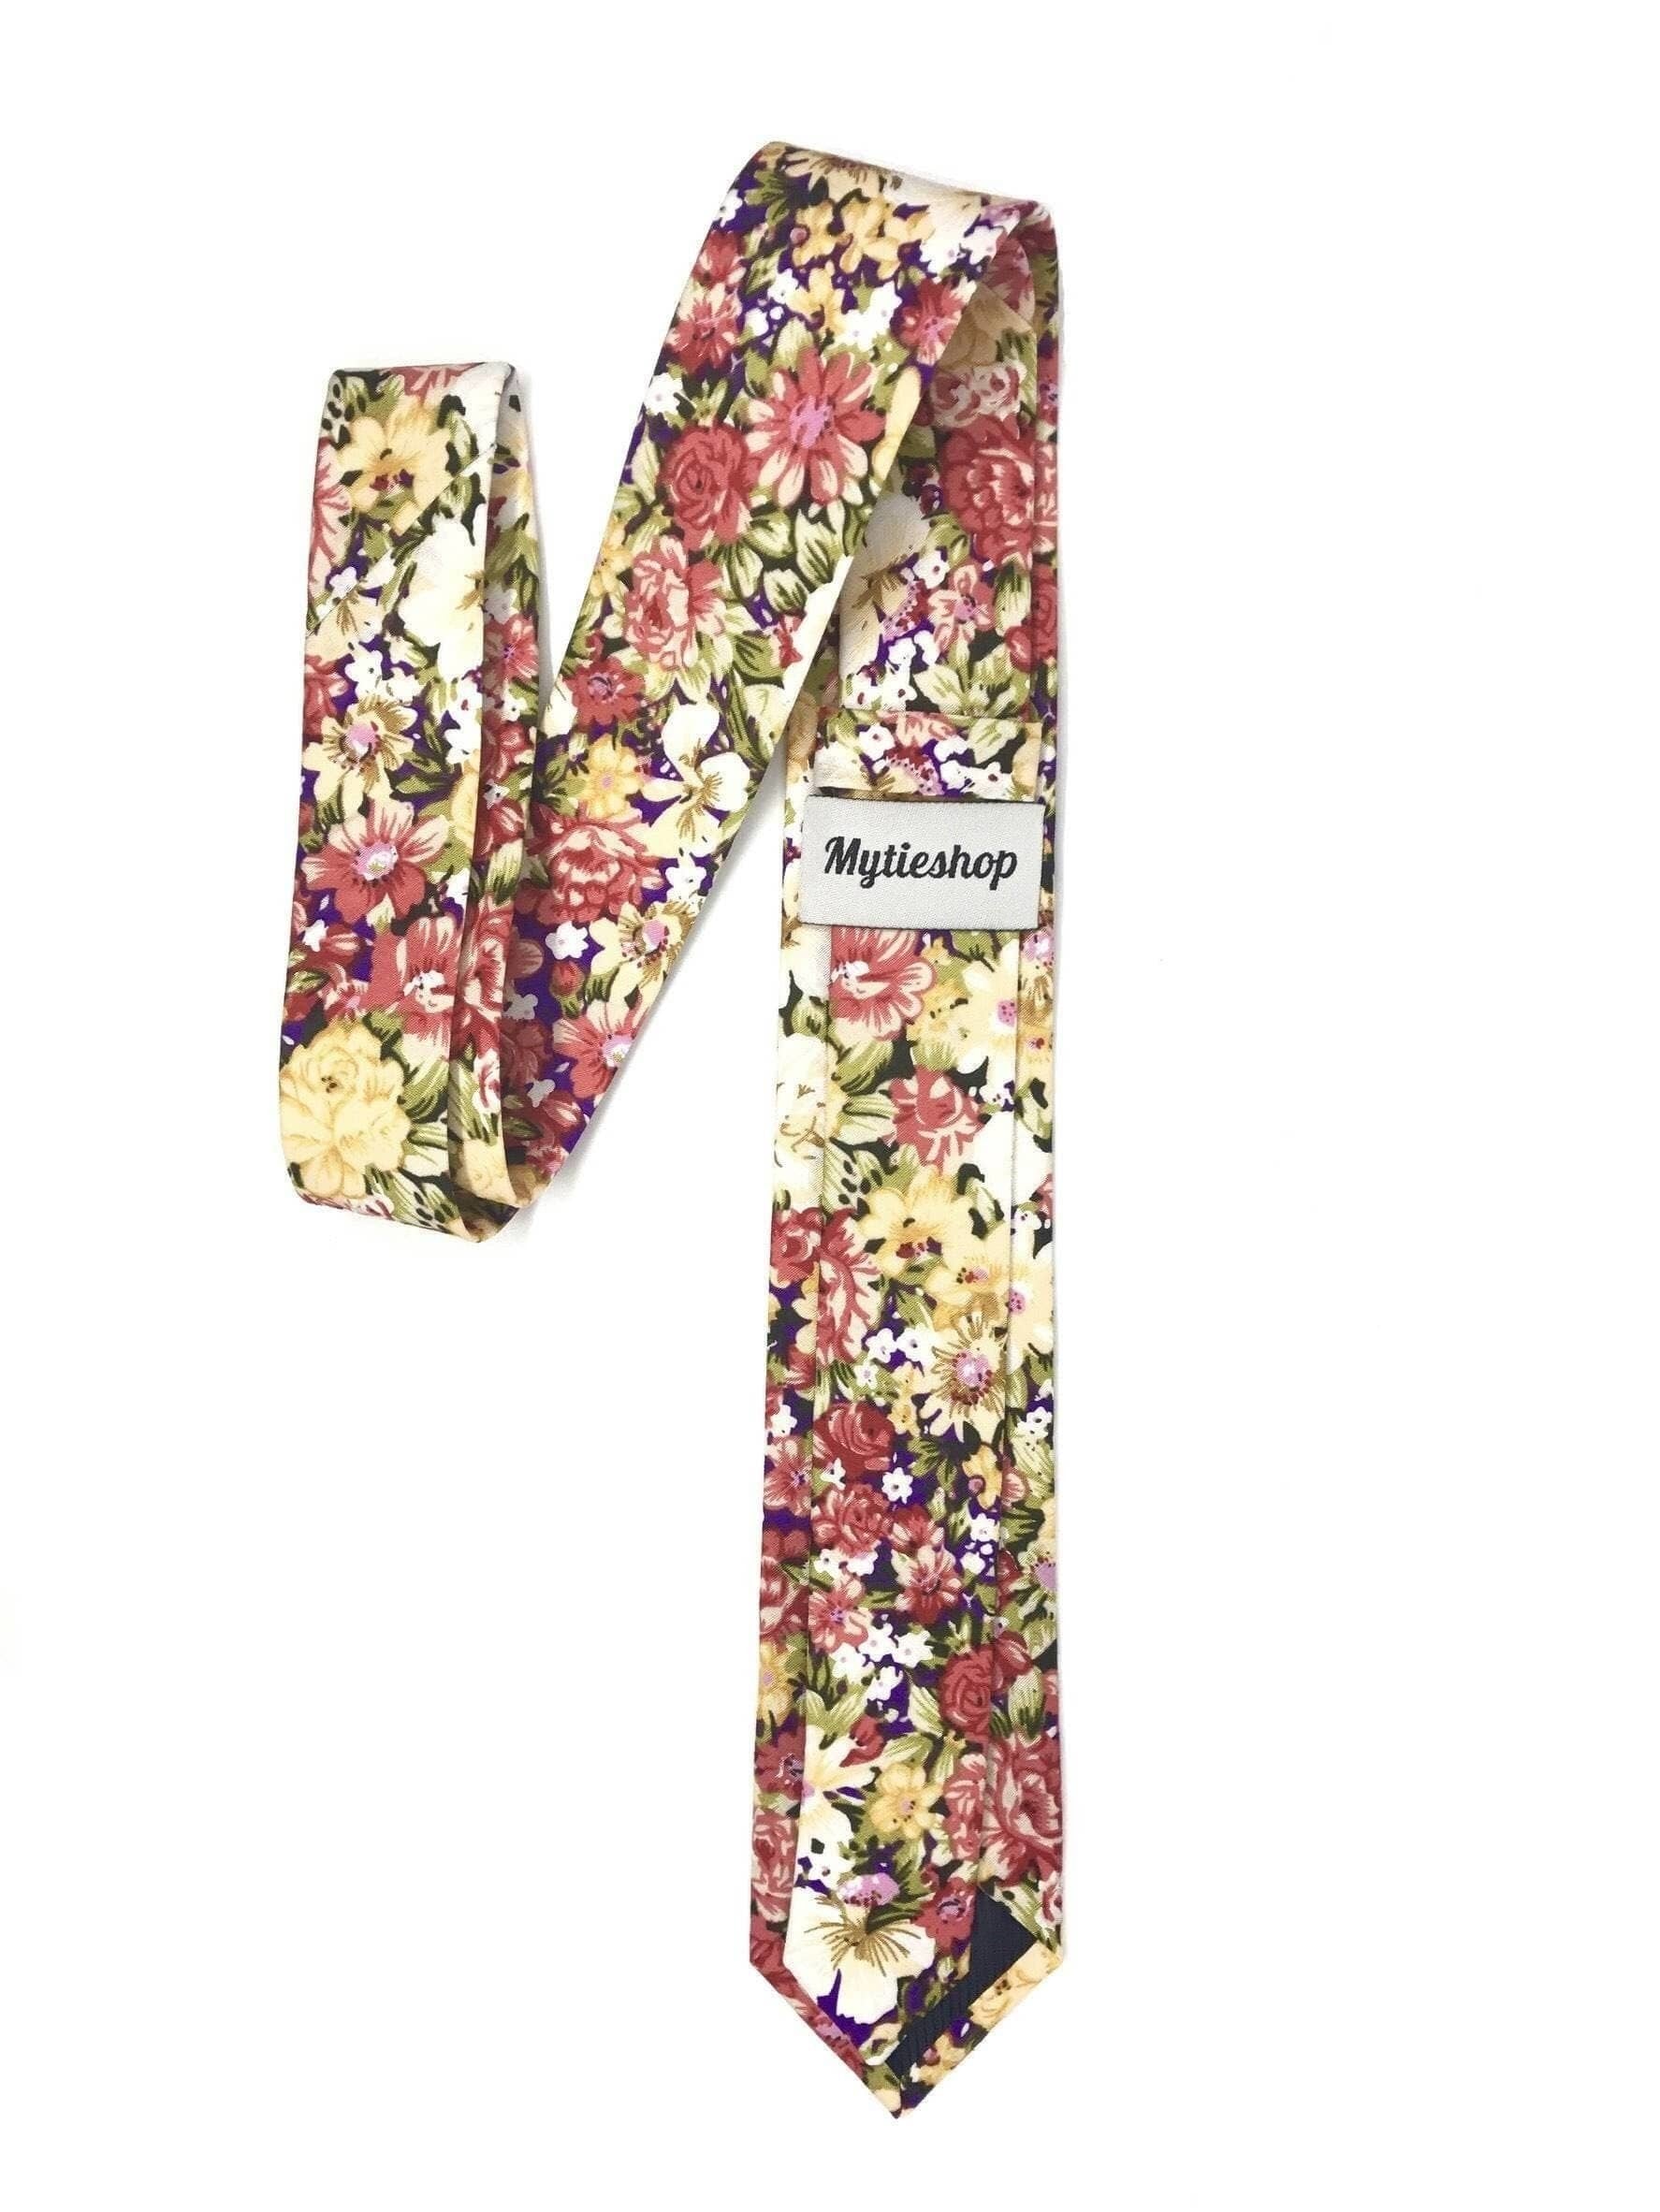 JACKSON Floral Skinny Tie 2.36&quot;-Neckties-JACKSON Floral Skinny Tie weddings and events, great for prom and anniversary gifts. Mens floral ties near me us ties tie shops cool ties-Mytieshop. Skinny ties for weddings anniversaries. Father of bride. Groomsmen. Cool skinny neckties for men. Neckwear for prom, missions and fancy events. Gift ideas for men. Anniversaries ideas. Wedding aesthetics. Flower ties. Dry flower ties.